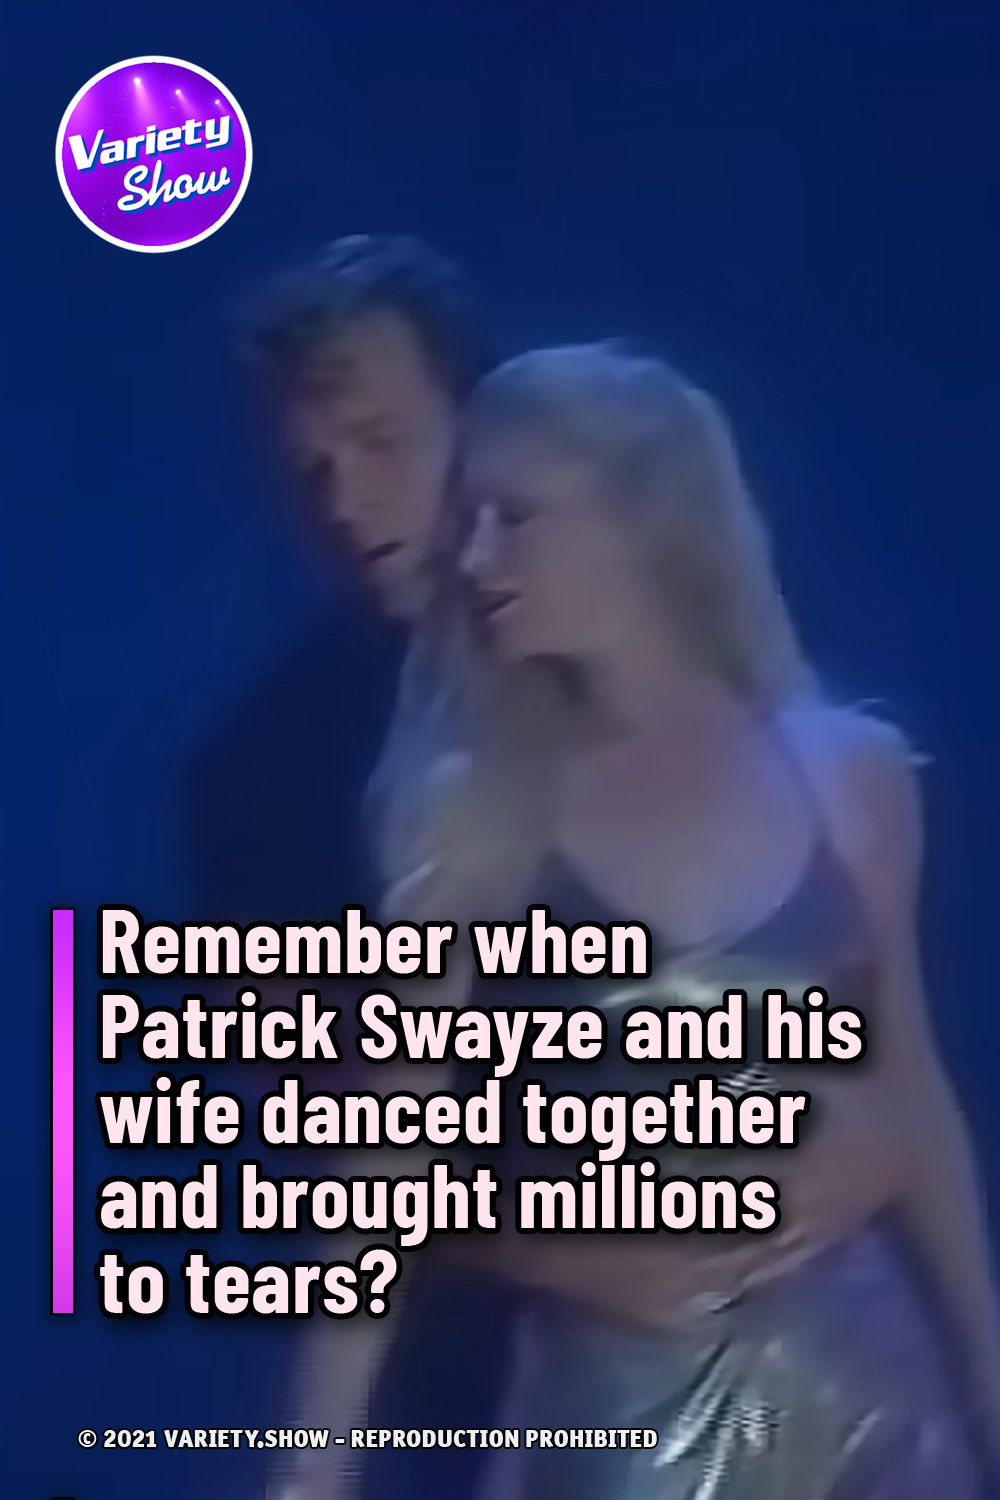 Remember when Patrick Swayze and his wife danced together and brought millions to tears?